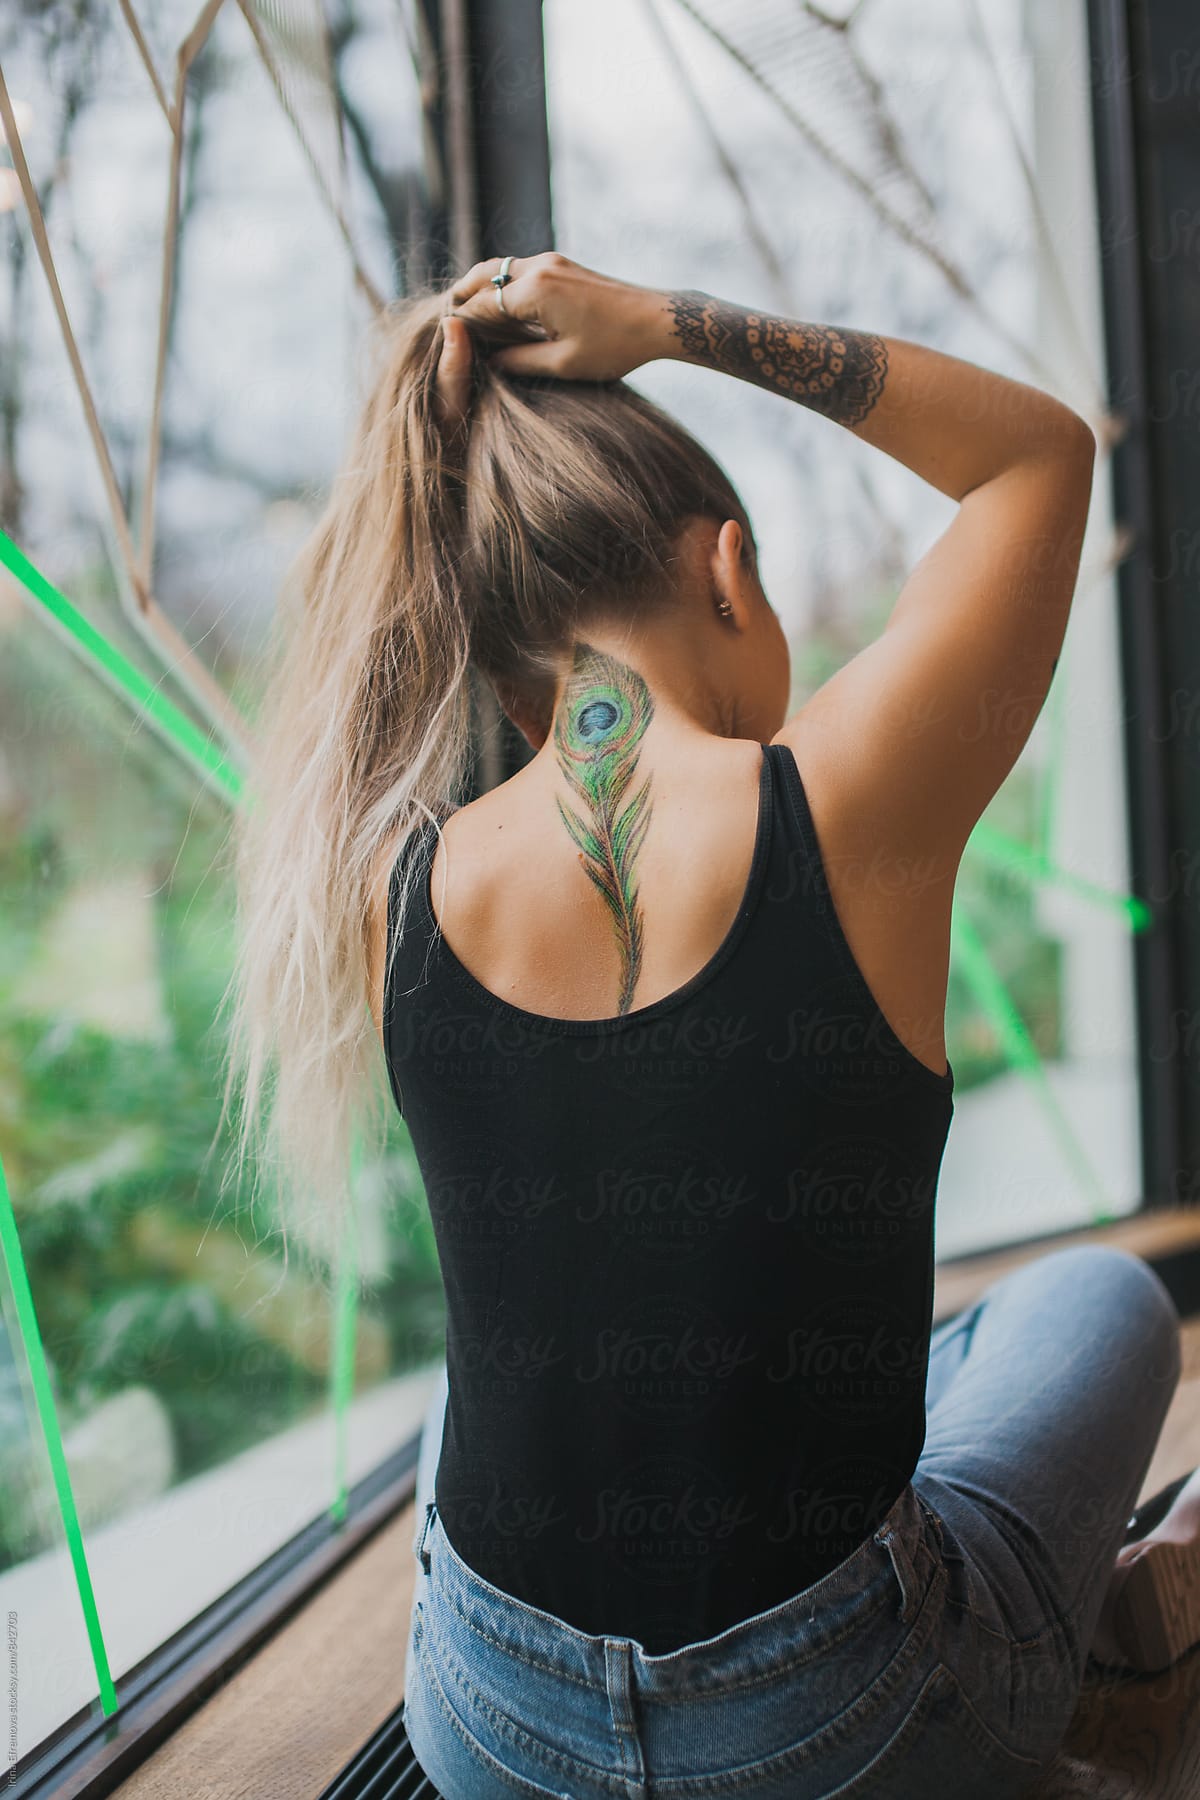 Girl With A Peacock Feather Tattoo by Stocksy Contributor Irina